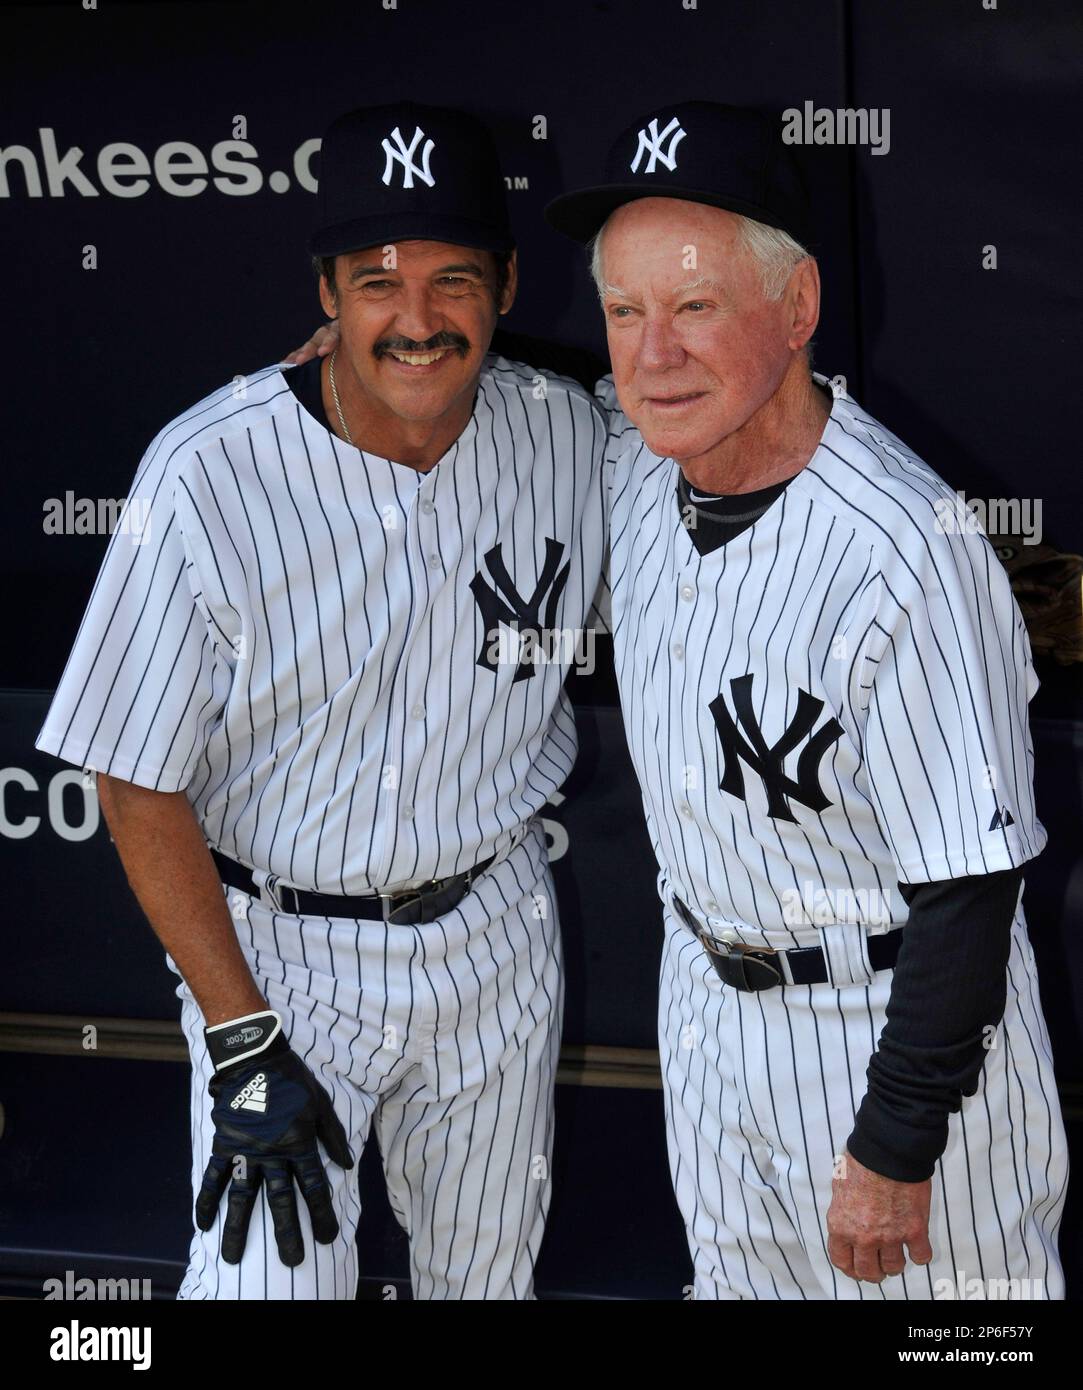 Former New York Yankees stars pitchers Whitey Ford and Ron Guidry